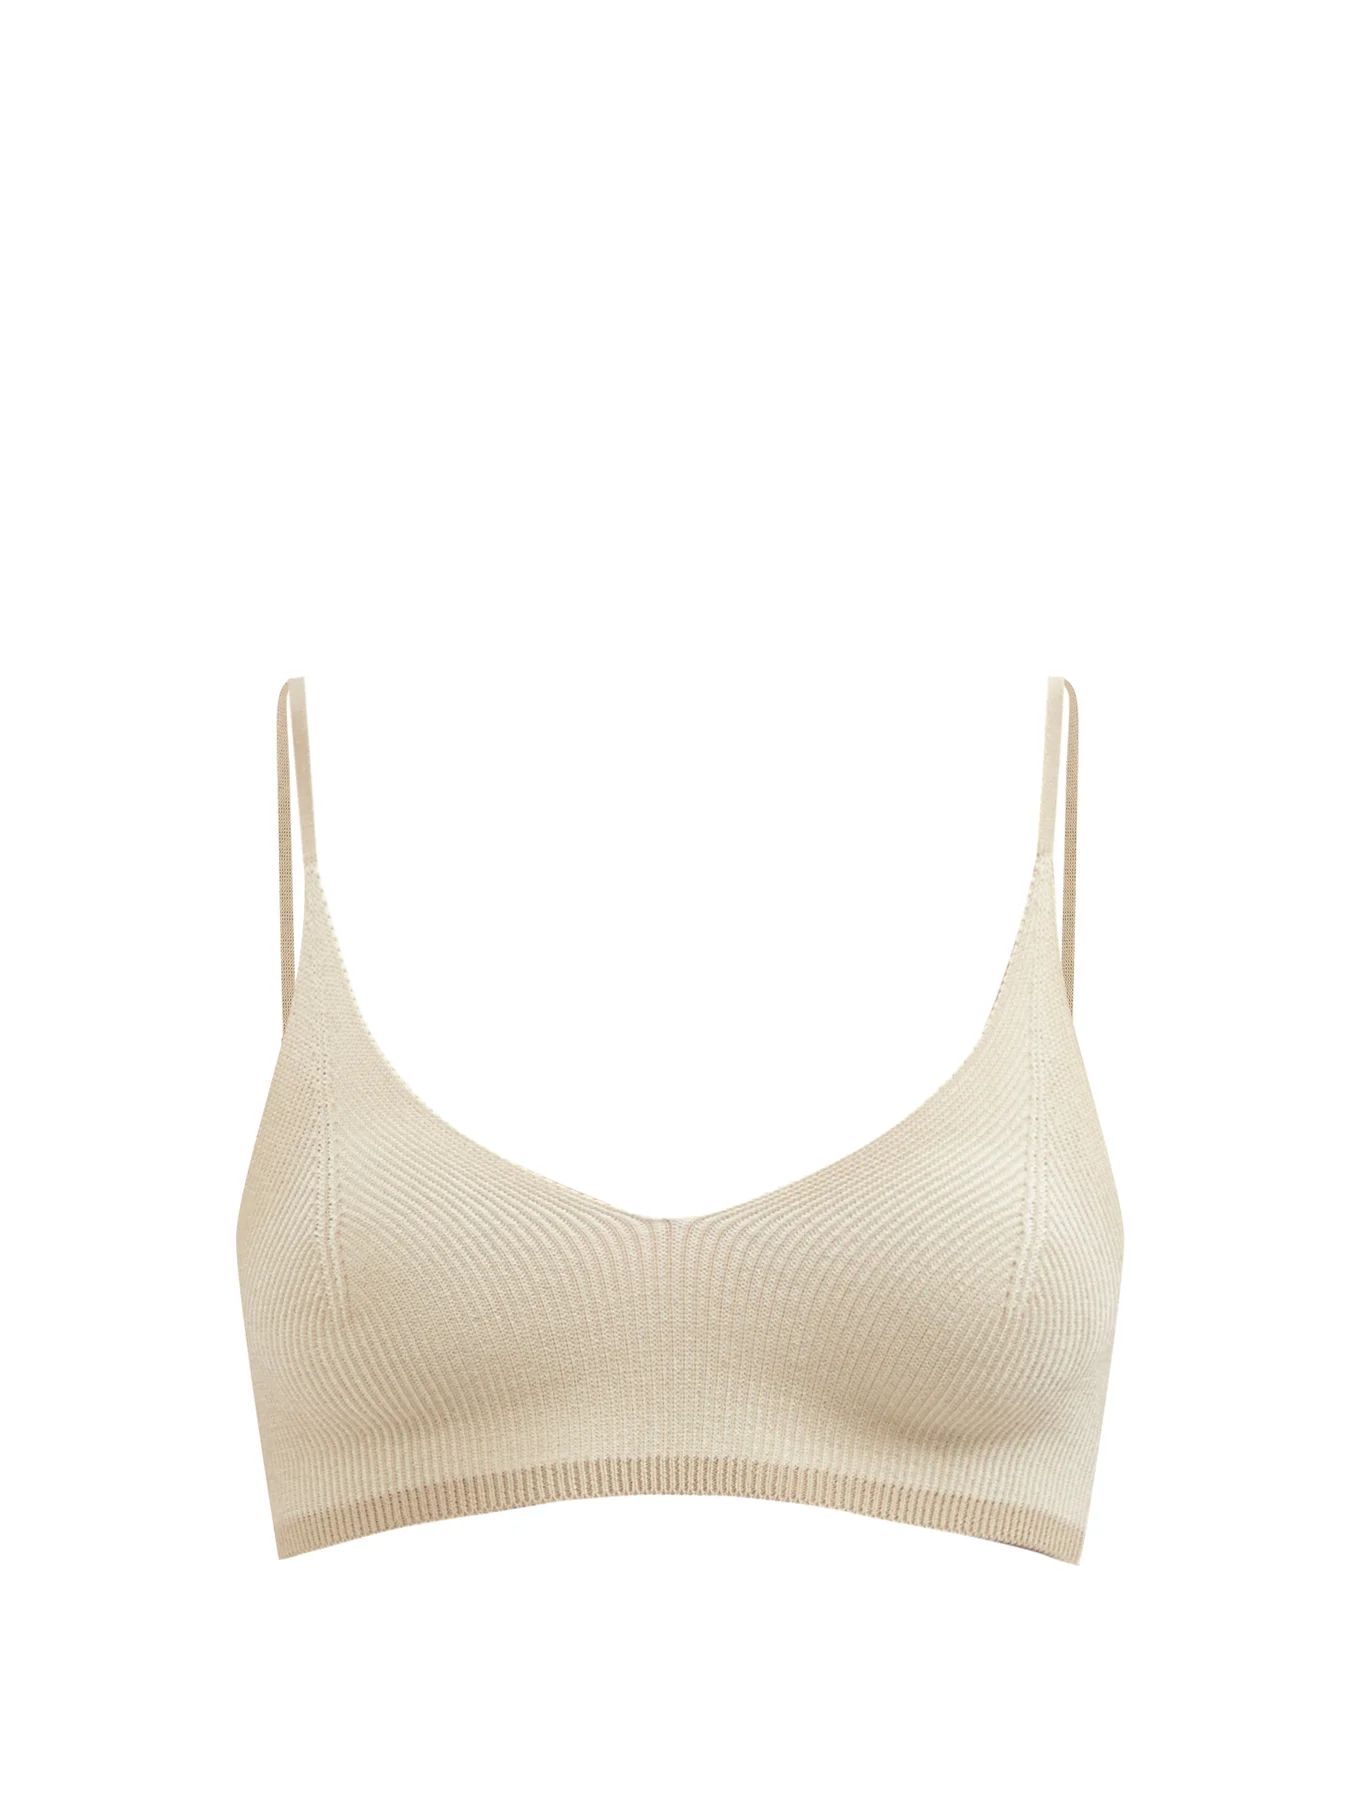 Valensole ribbed bralette | Jacquemus | Matches (US)